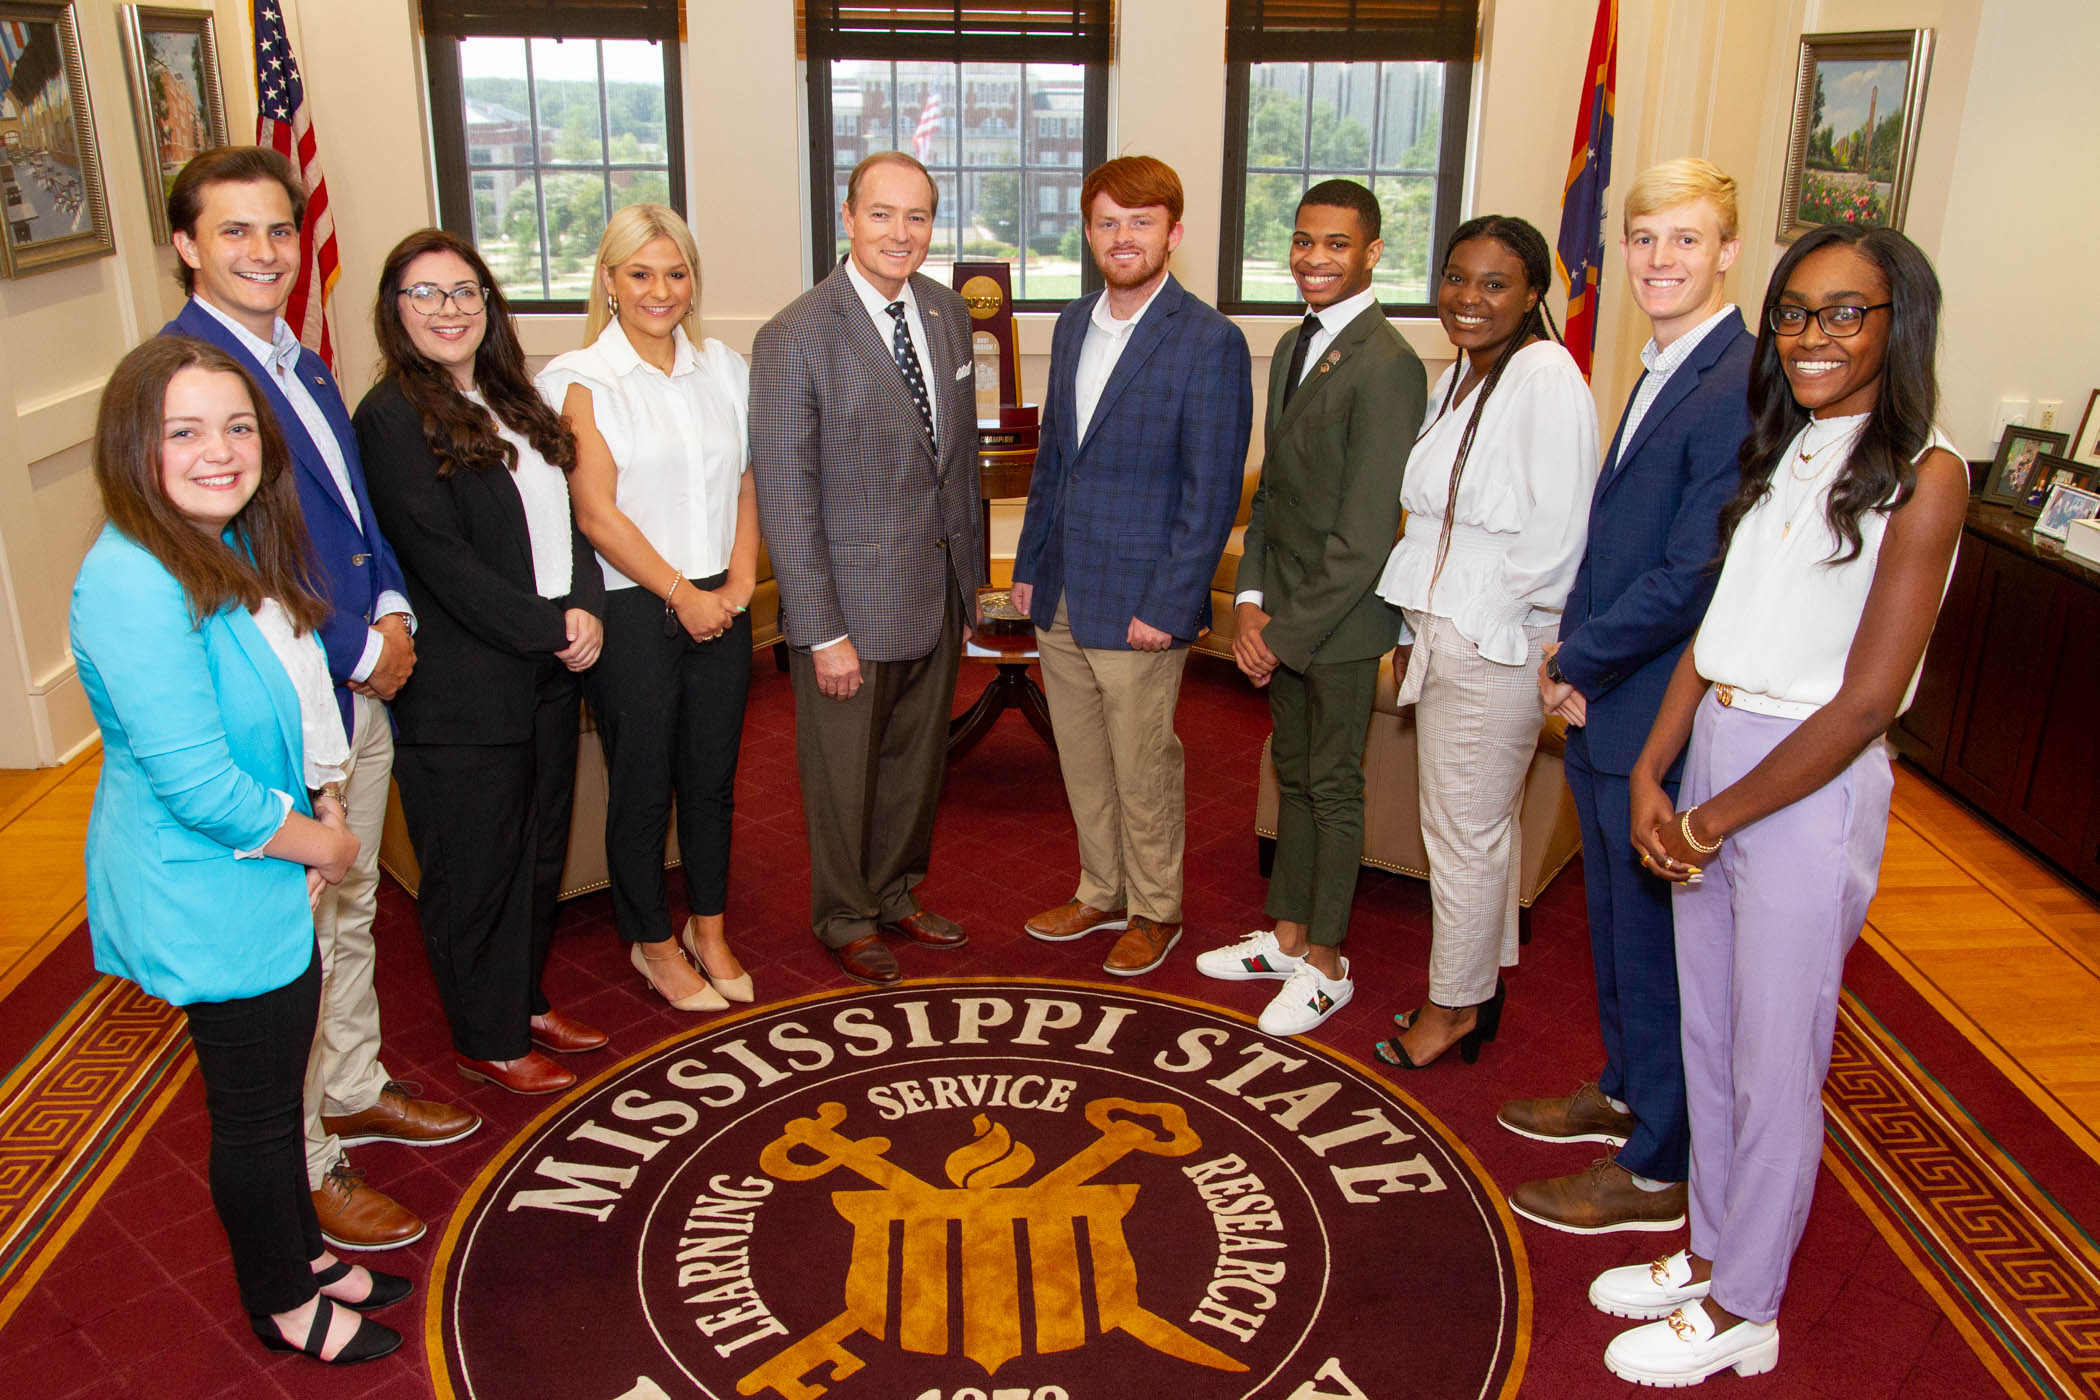 President Keenum and Student Association Officers gather around the university seal for a photo